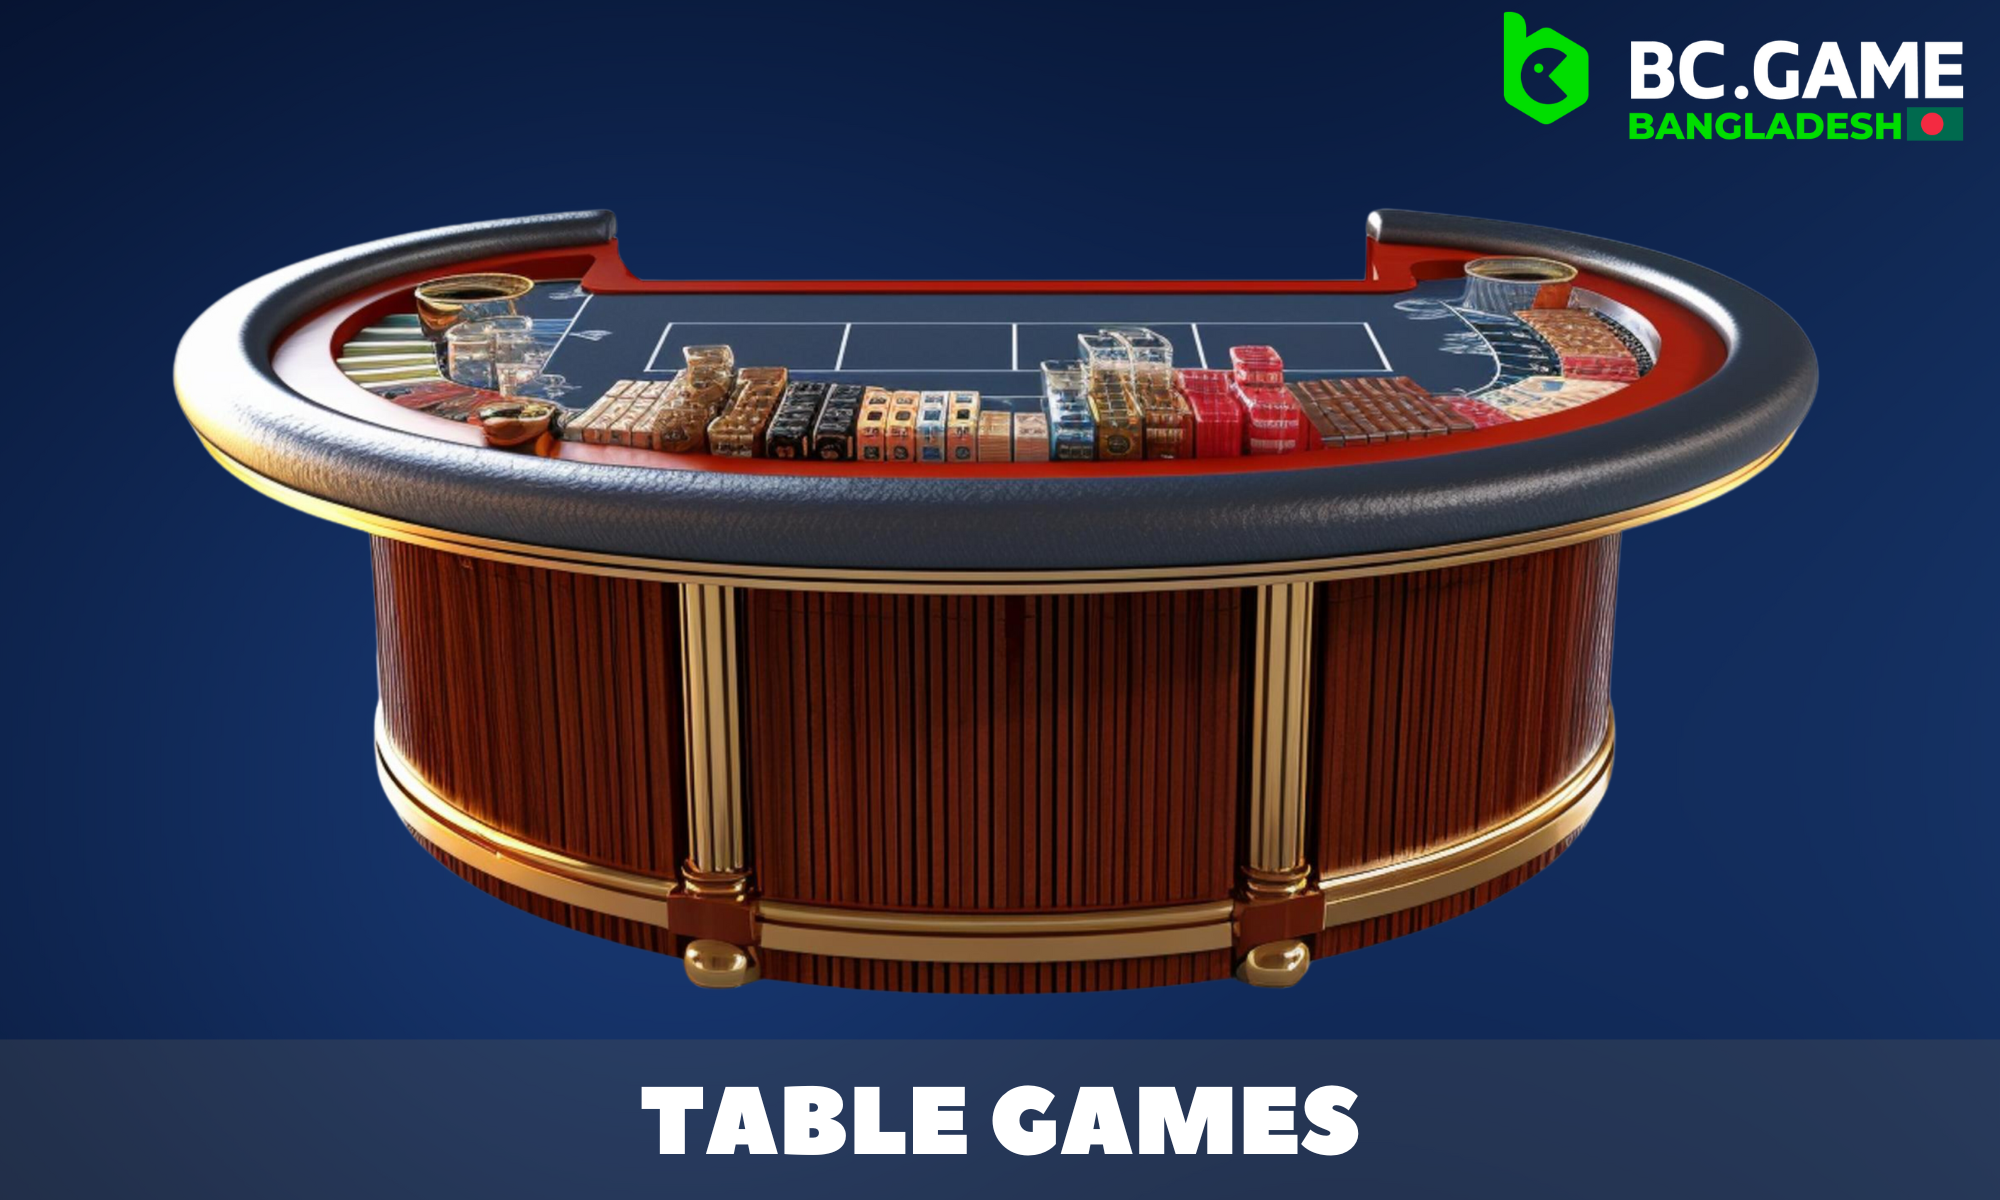 The BC Game offers 38 classic and modern table games